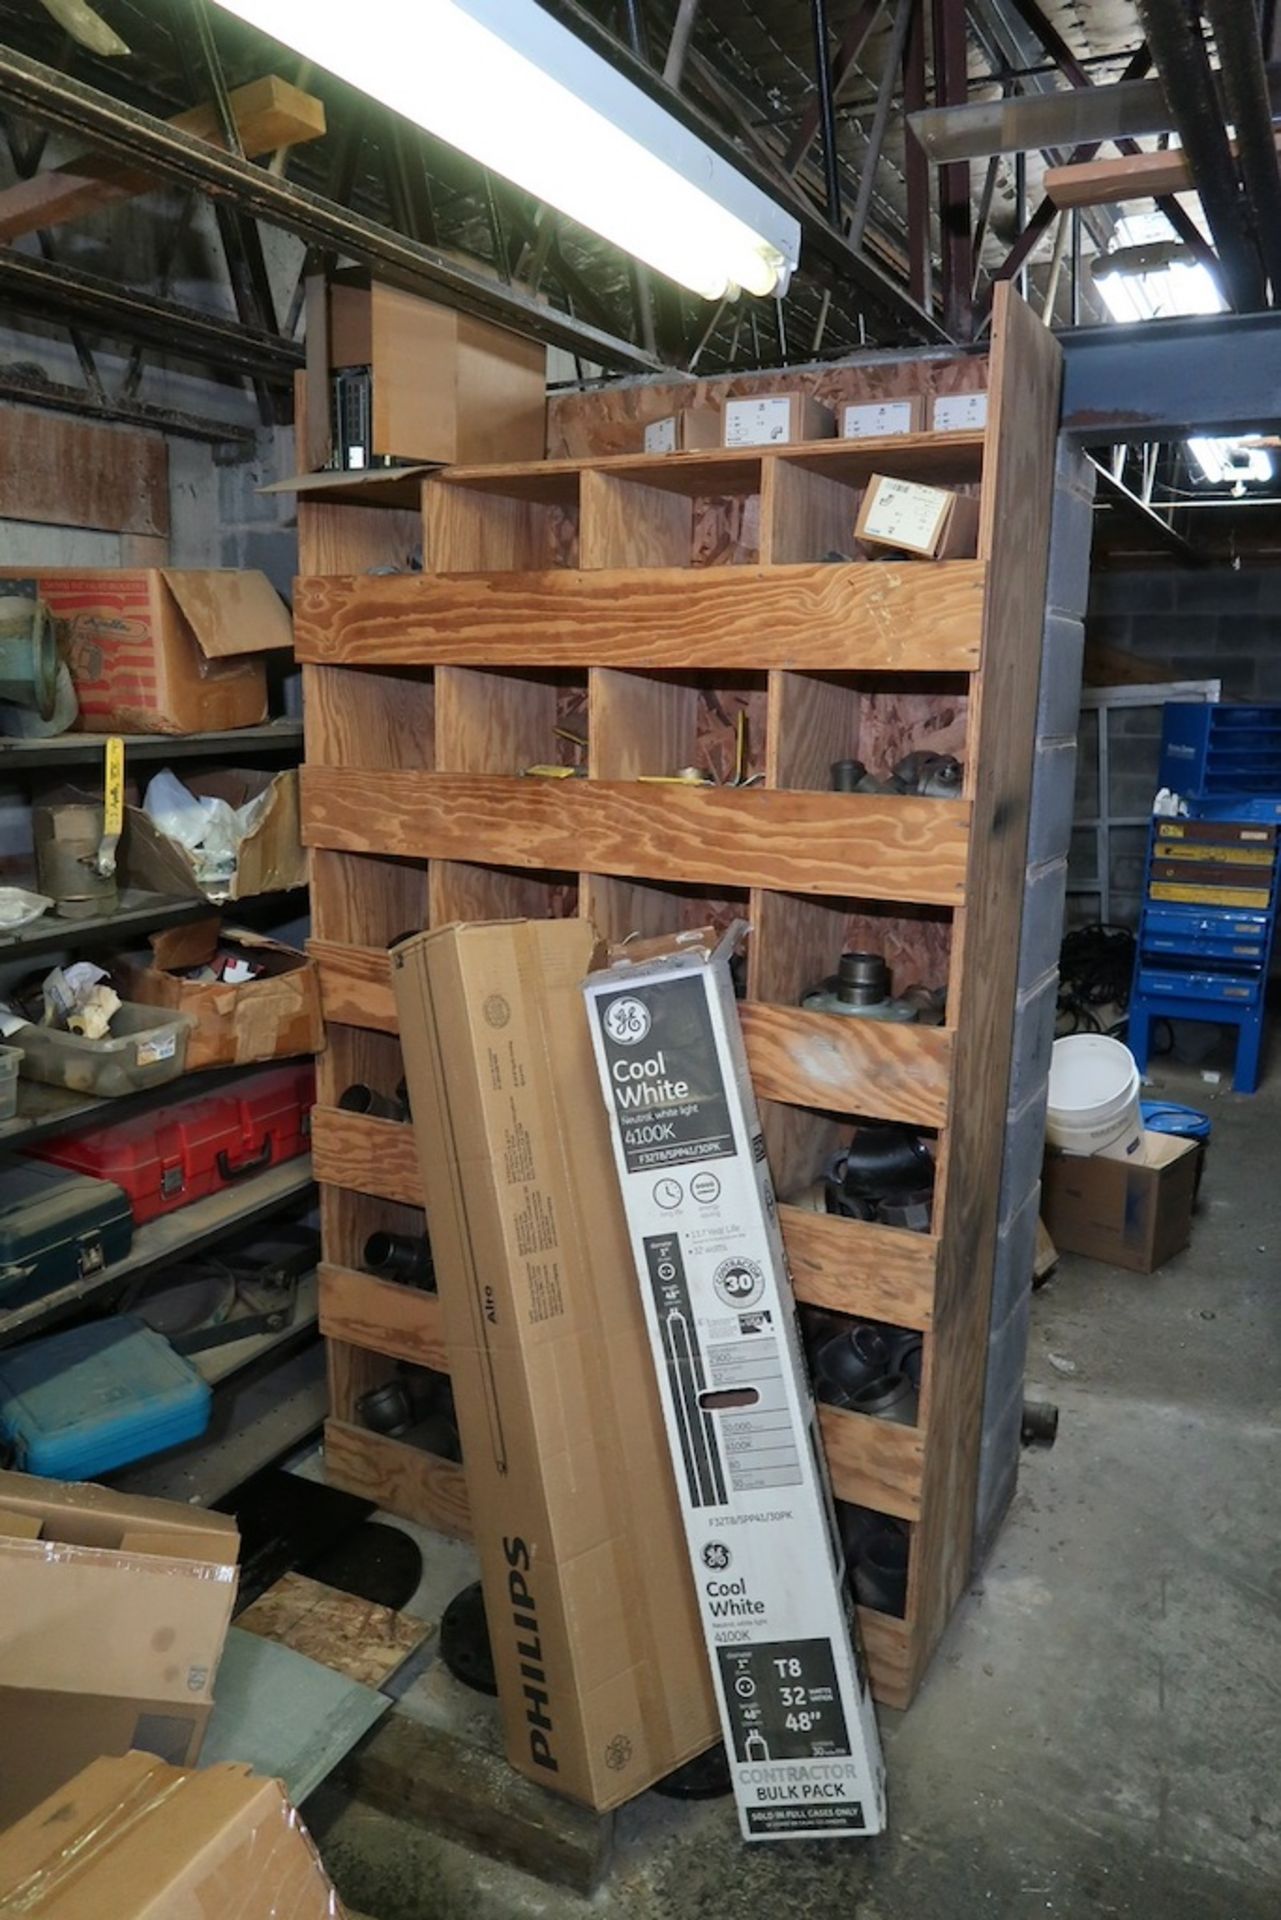 Remaining Contents of Under-Ramp Storage Room, Including Conveyor Parts and Rollers, Etc. - Image 13 of 21